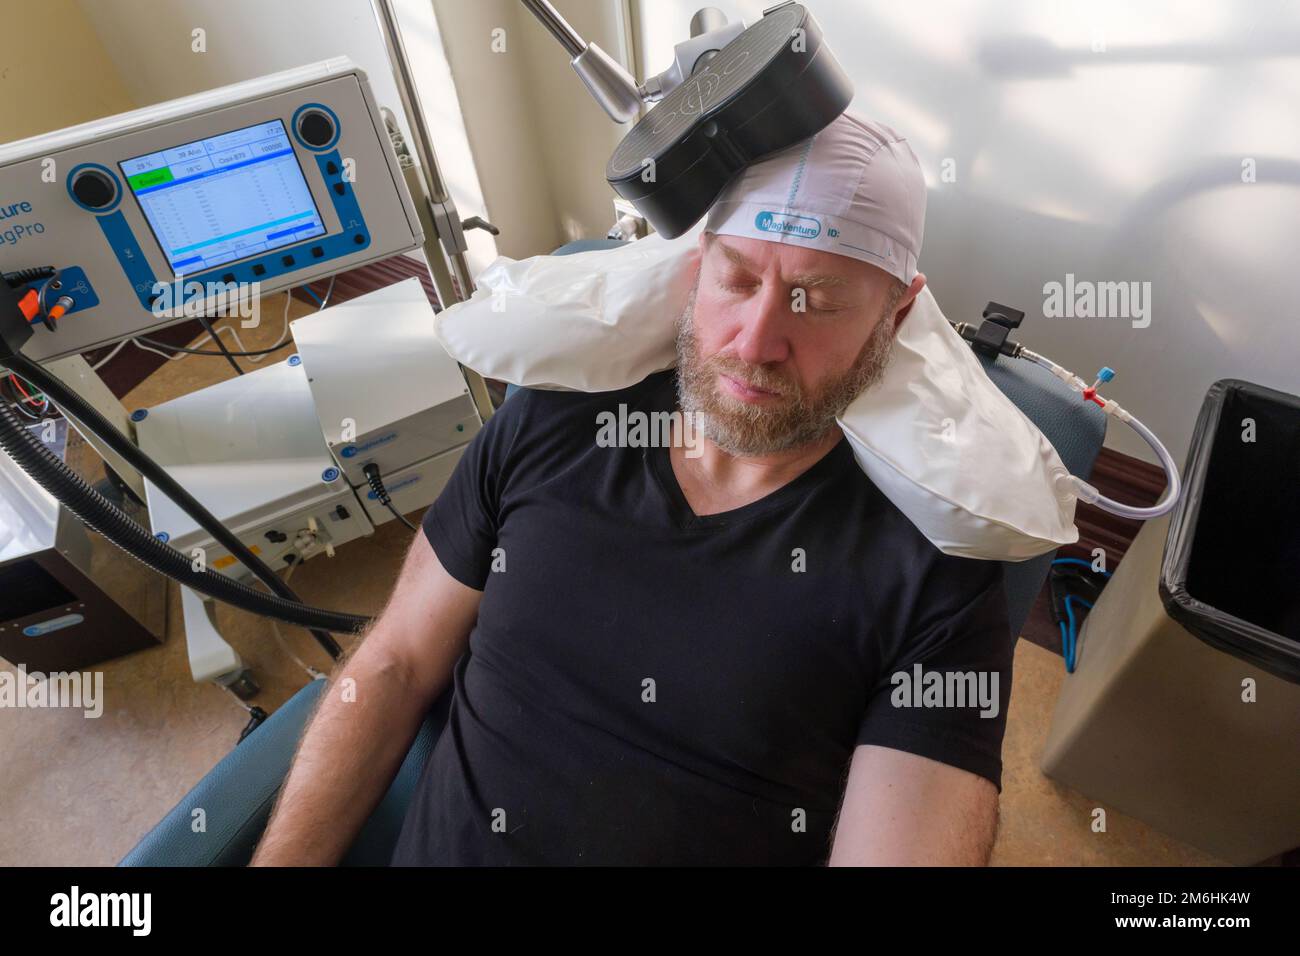 Montreal, CA - 12 november 2022: Patient undergoing Repetitive Transcranial Magnetic Stimulation (rTMS) to treat anxiety and depression Stock Photo